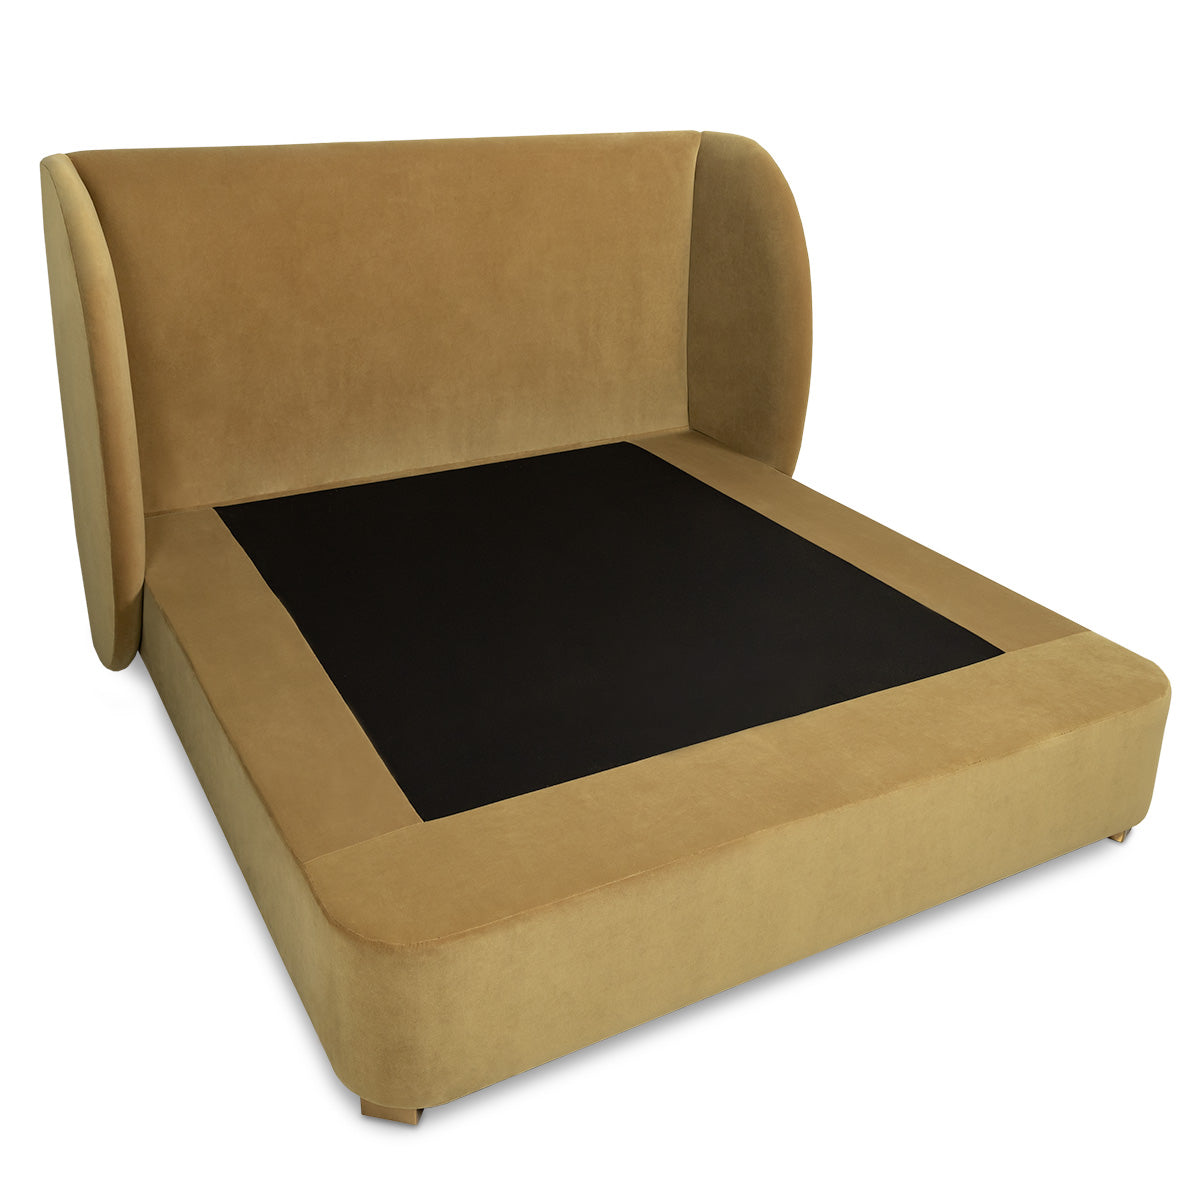 Eden Rock Bed with Brushed Brass Block Legs